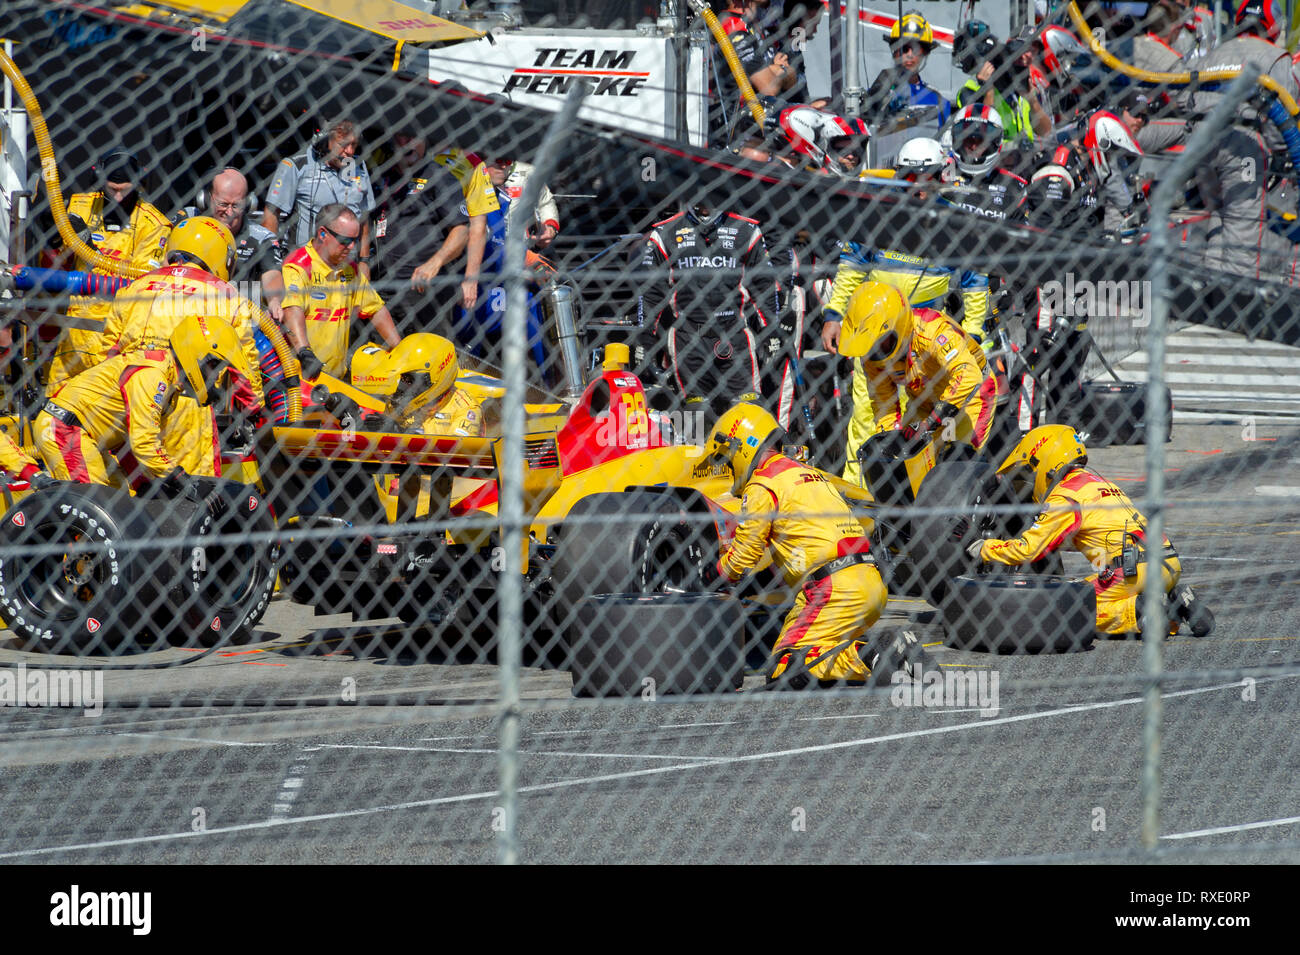 Indy car race day a Toronto Foto Stock